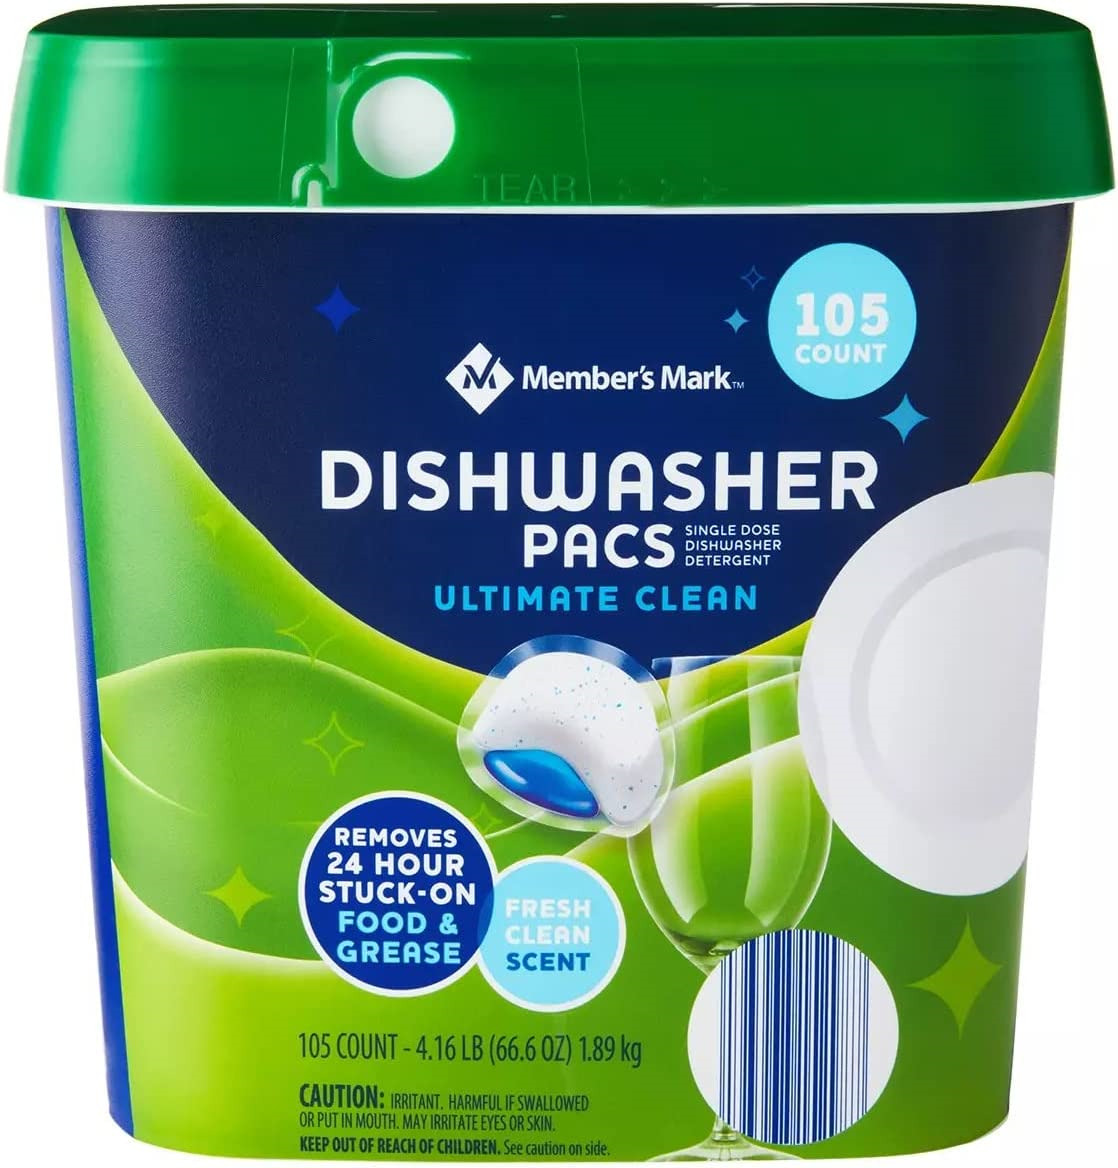 Members Mark Auto Dishwasher Pacs Ultimate Clean (105 Count)